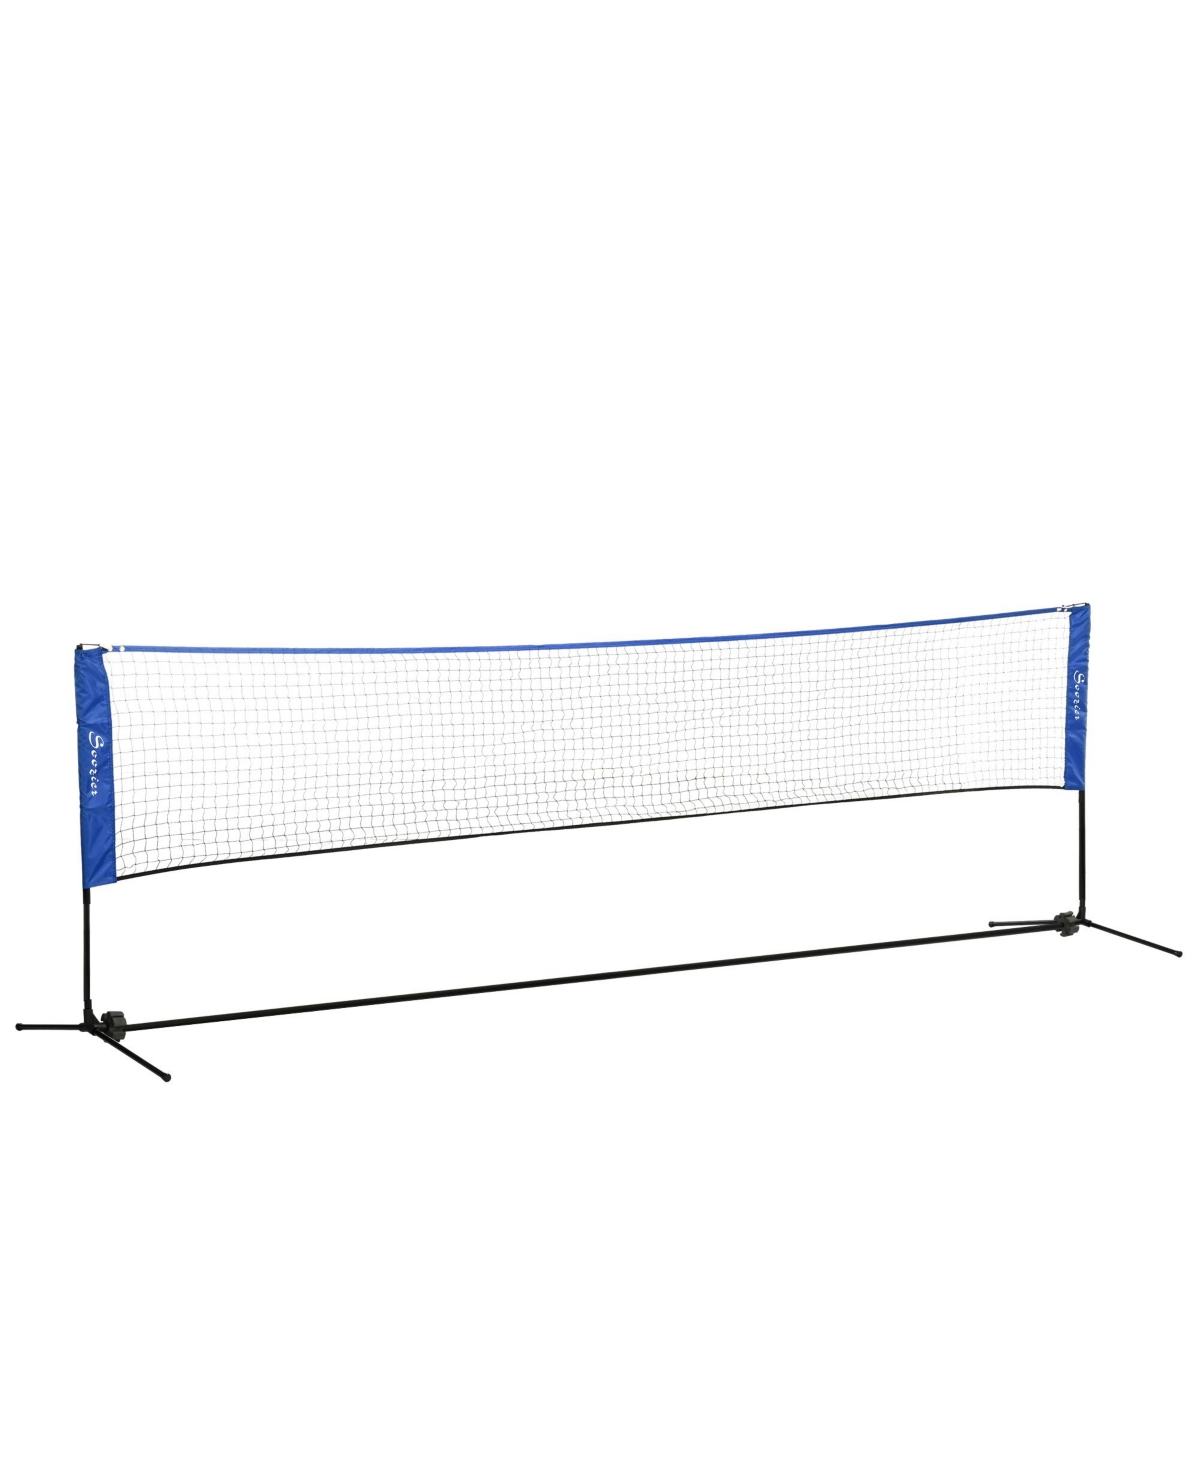 14ft Badminton Net, for Volleyball, Tennis, Badminton, Pickleball - Black and blue